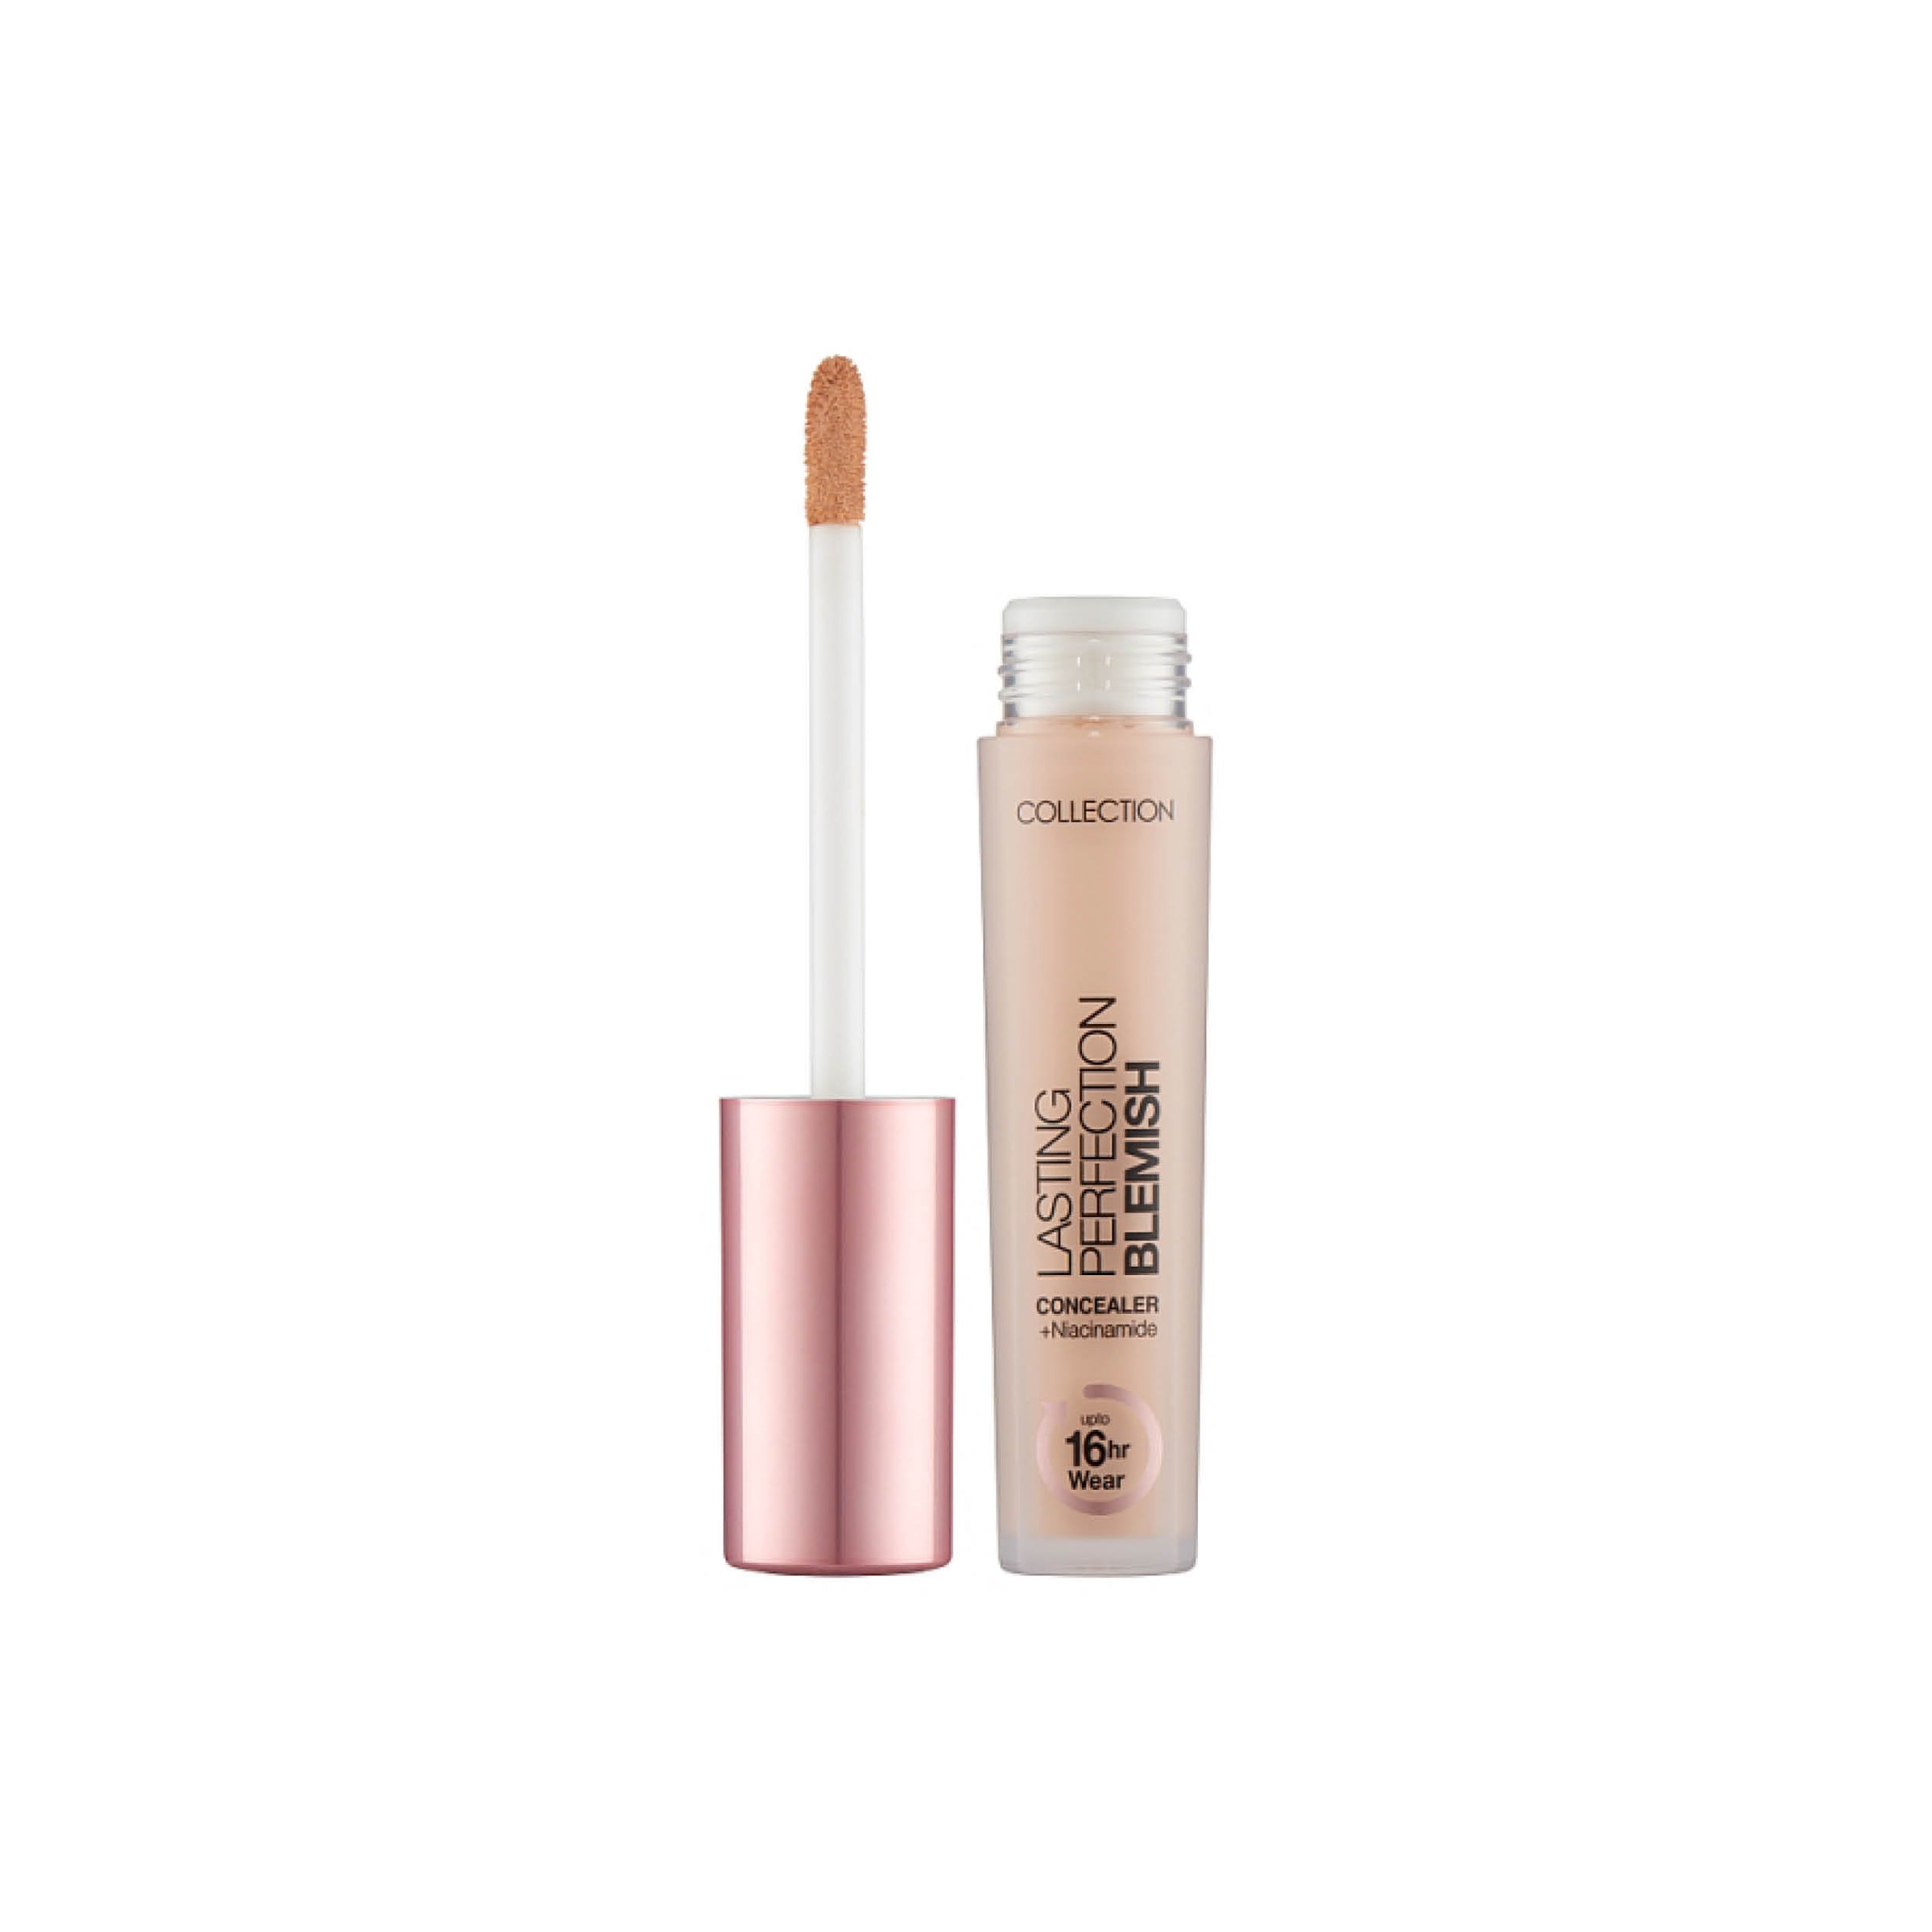 Opdage delikatesse Fatal Lasting Perfection Blemish Concealer – Collection Cosmetics